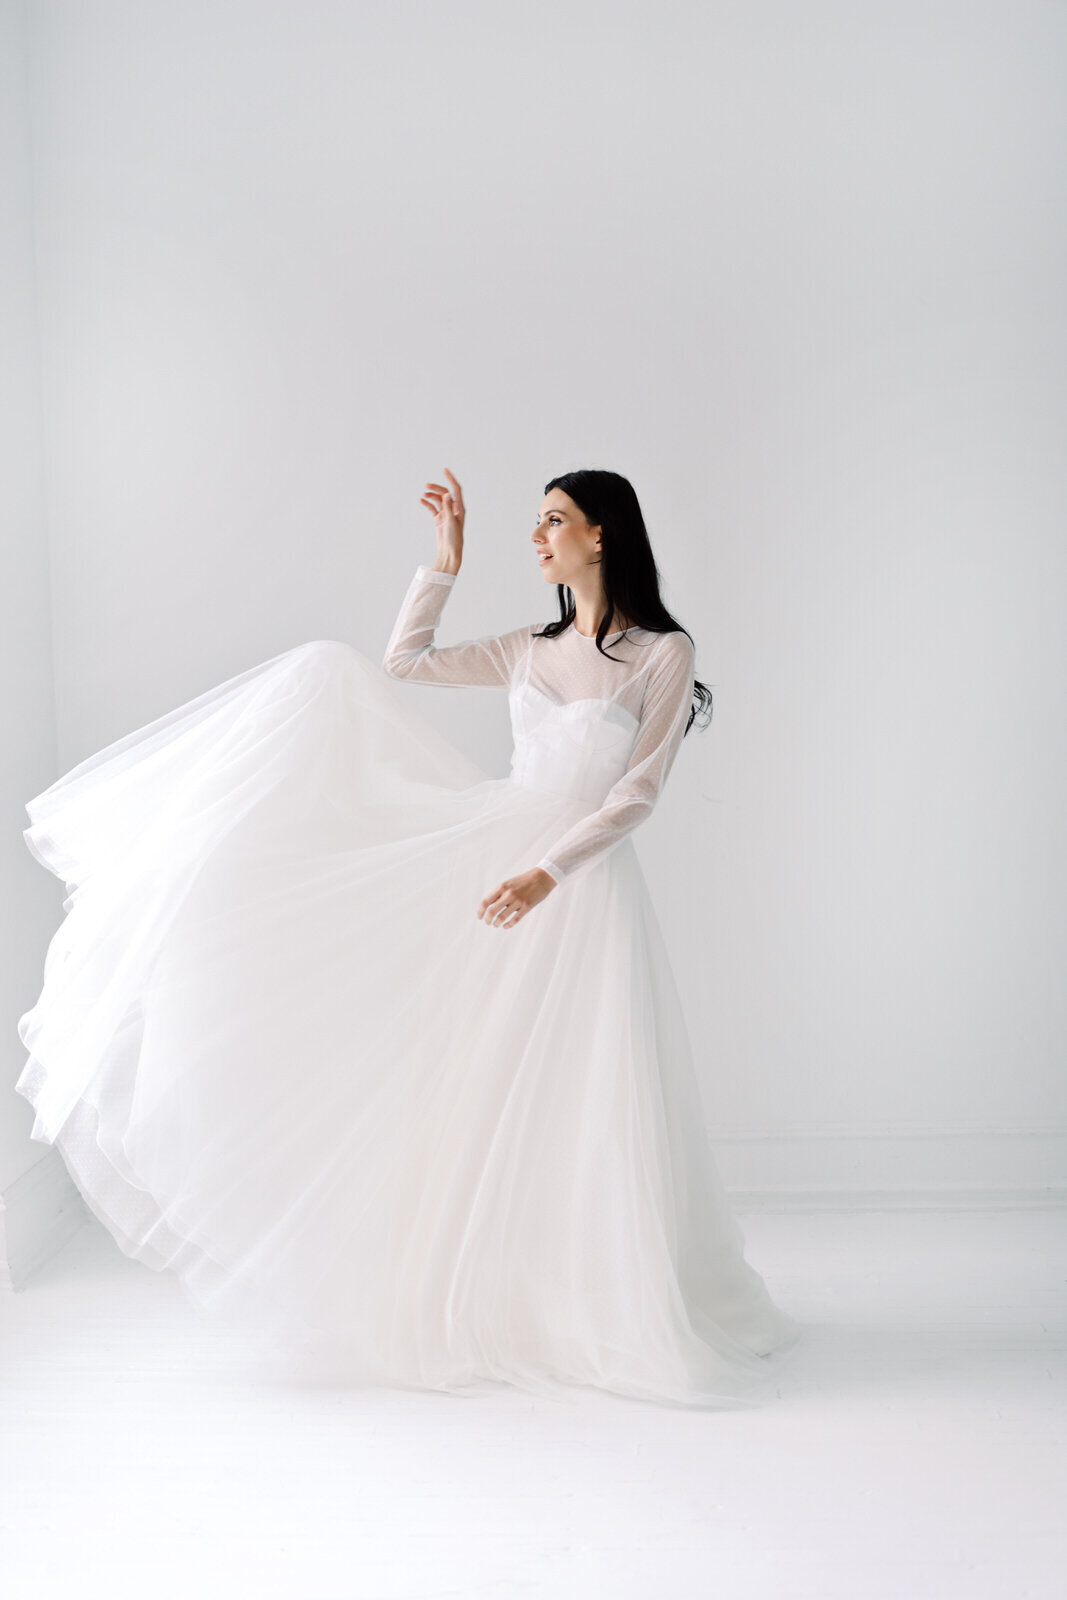 Stylish Bridal Editorial Photography for a New York City Brand 2